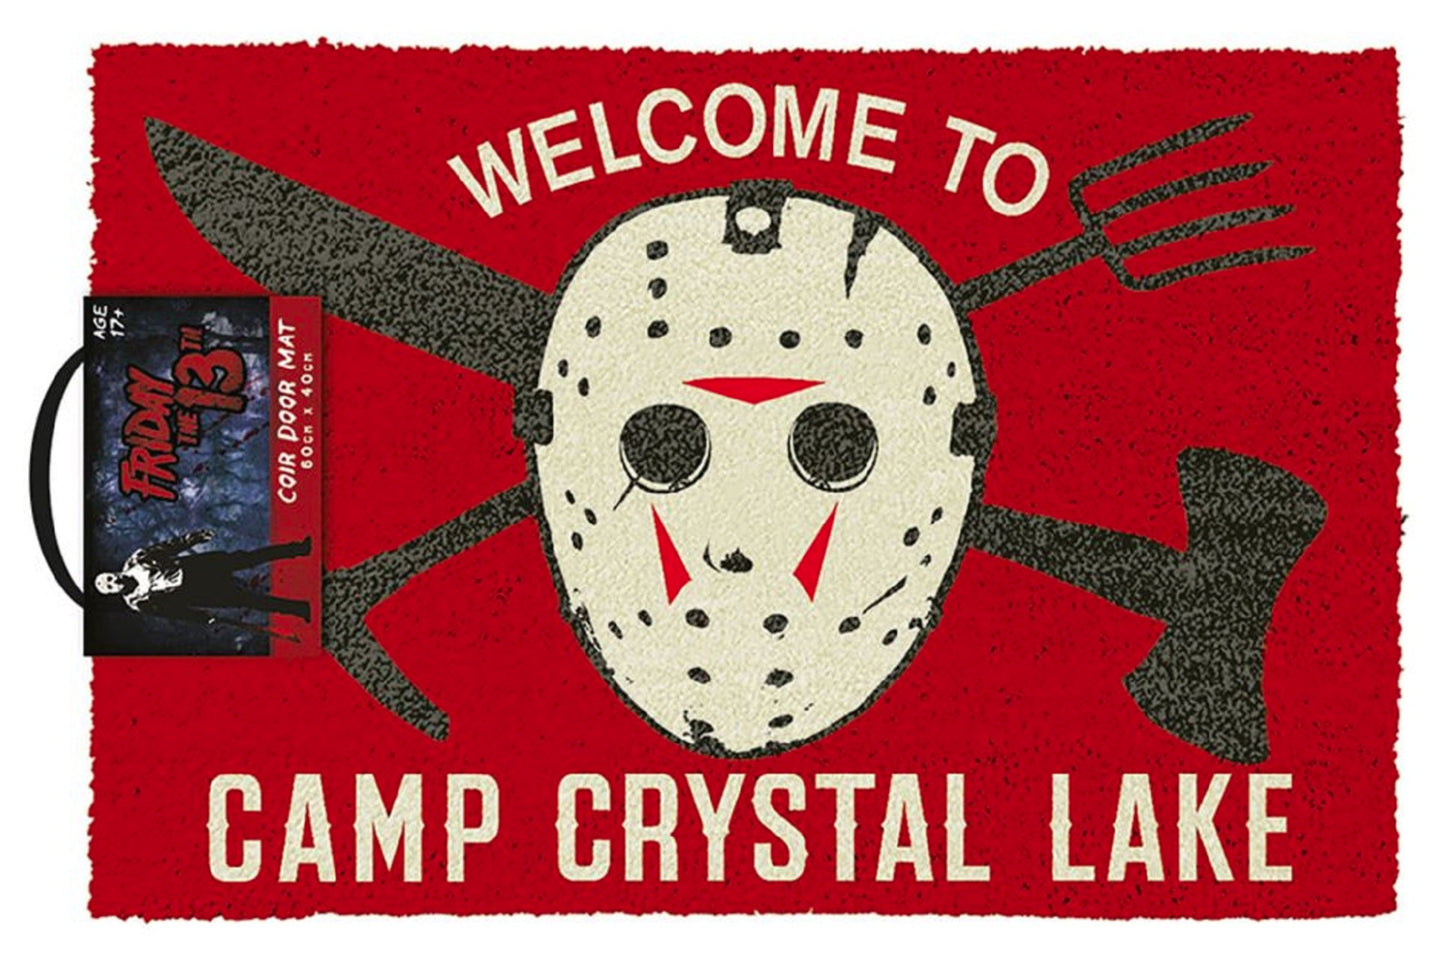 Friday The 13th (Camp Crystal)